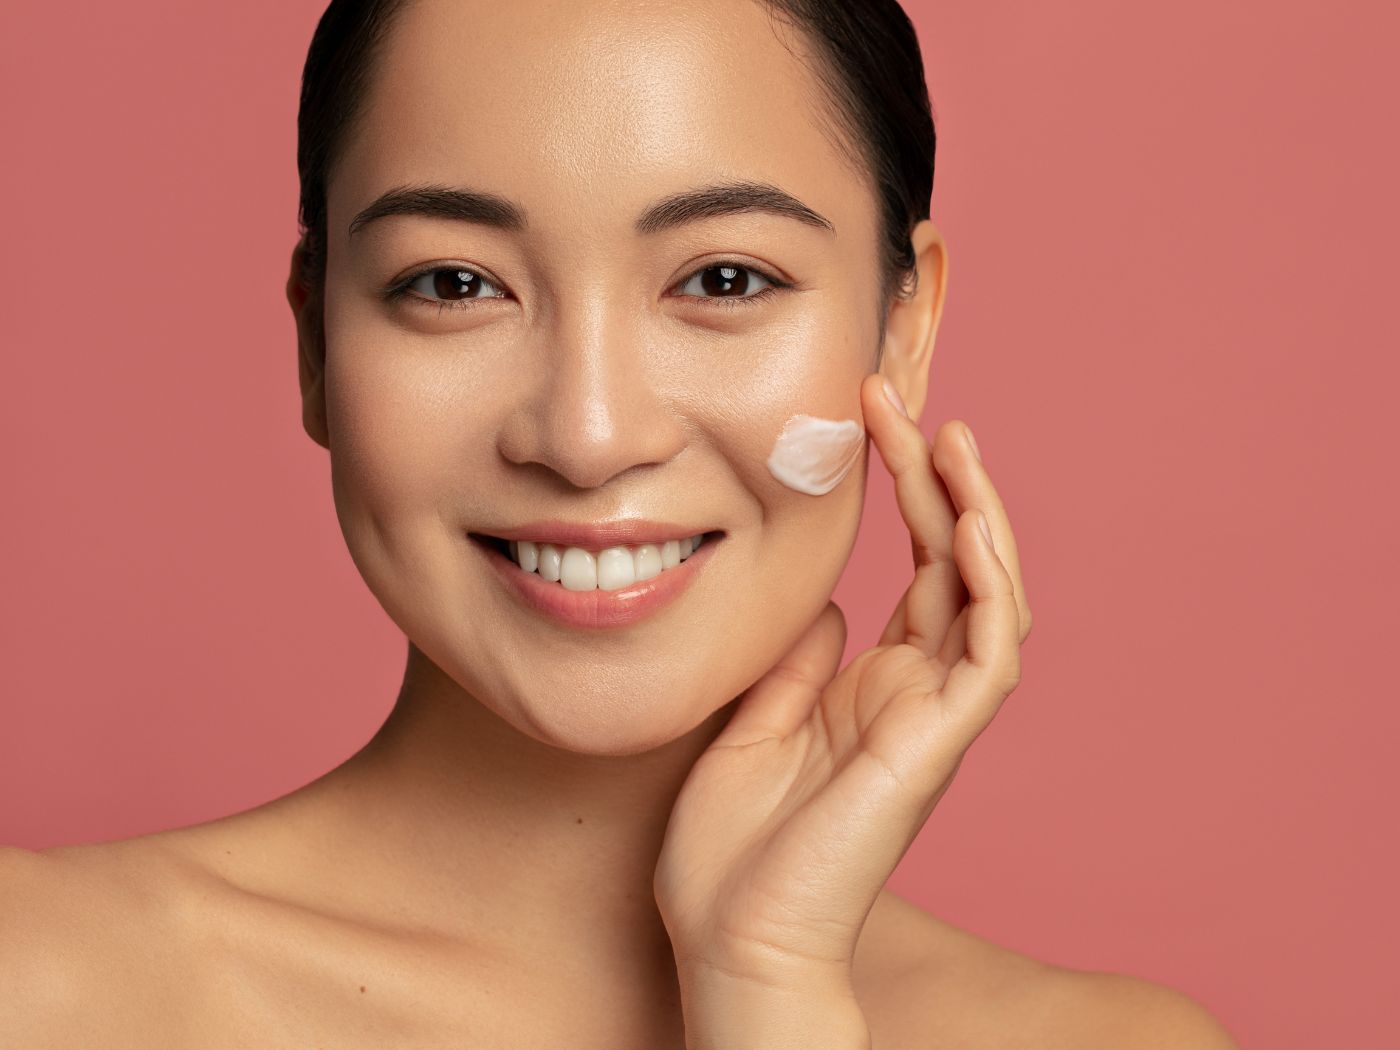 Here Are 8 Ways You Can Apply Your Face Cream Correctly